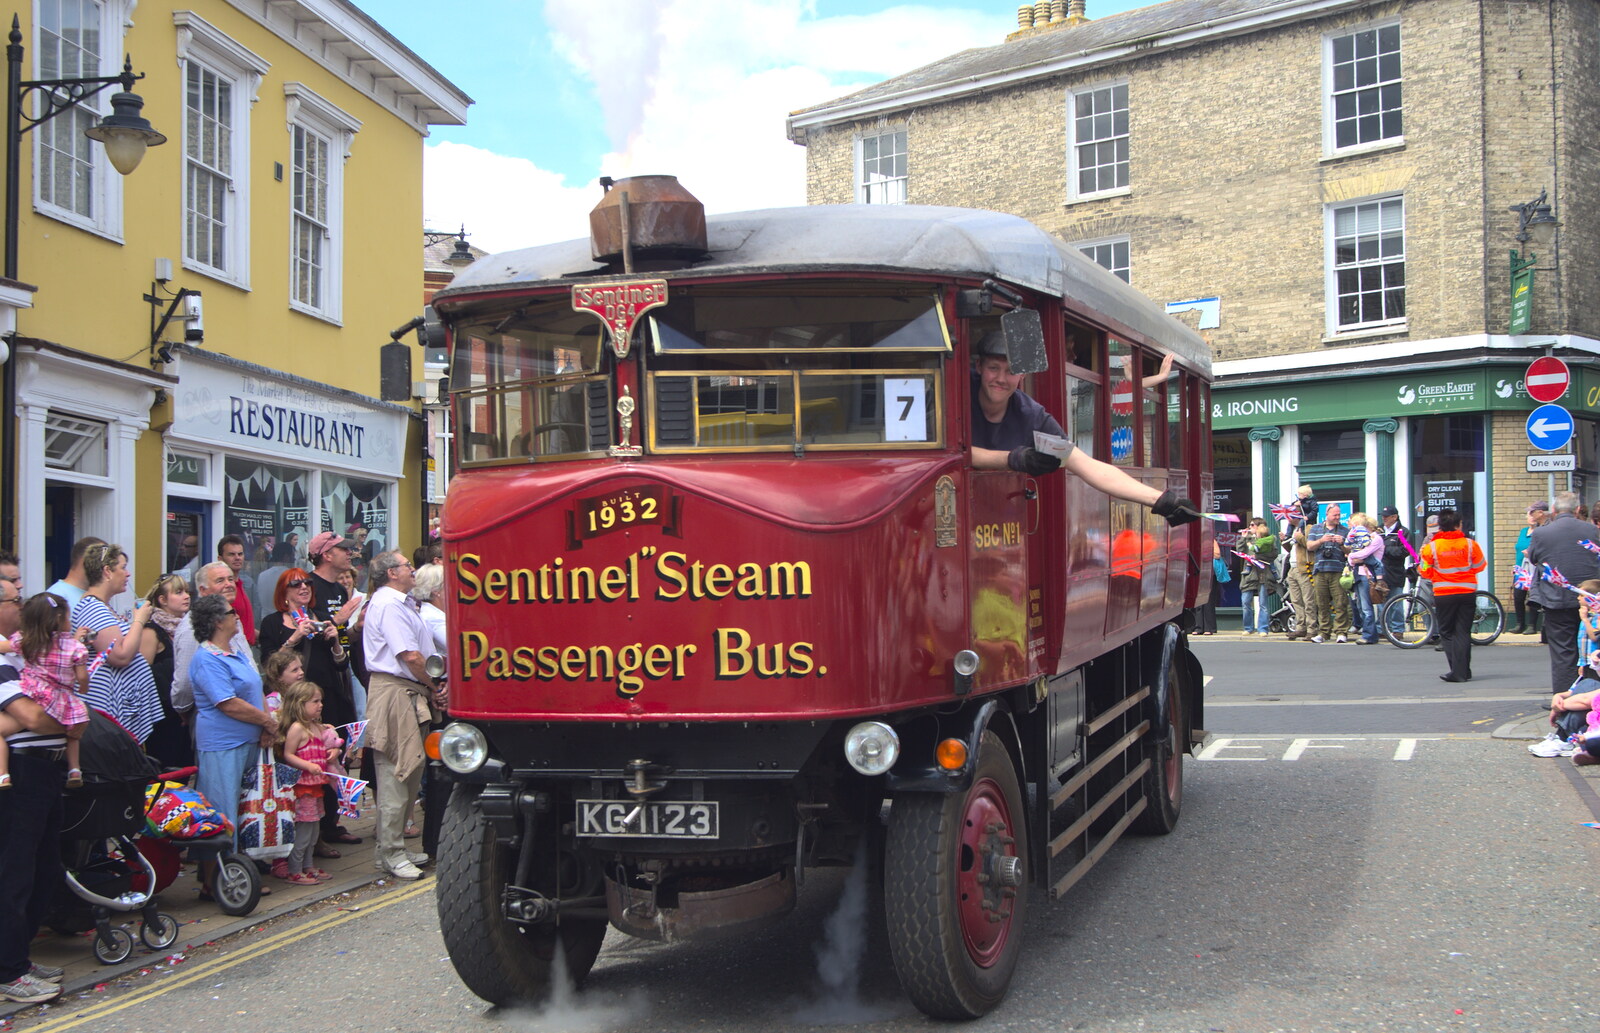 A 1932 Sentinel Steam passenger bus from Morris Dancing and a Carnival Procession, Diss, Norfolk - 17th June 2012